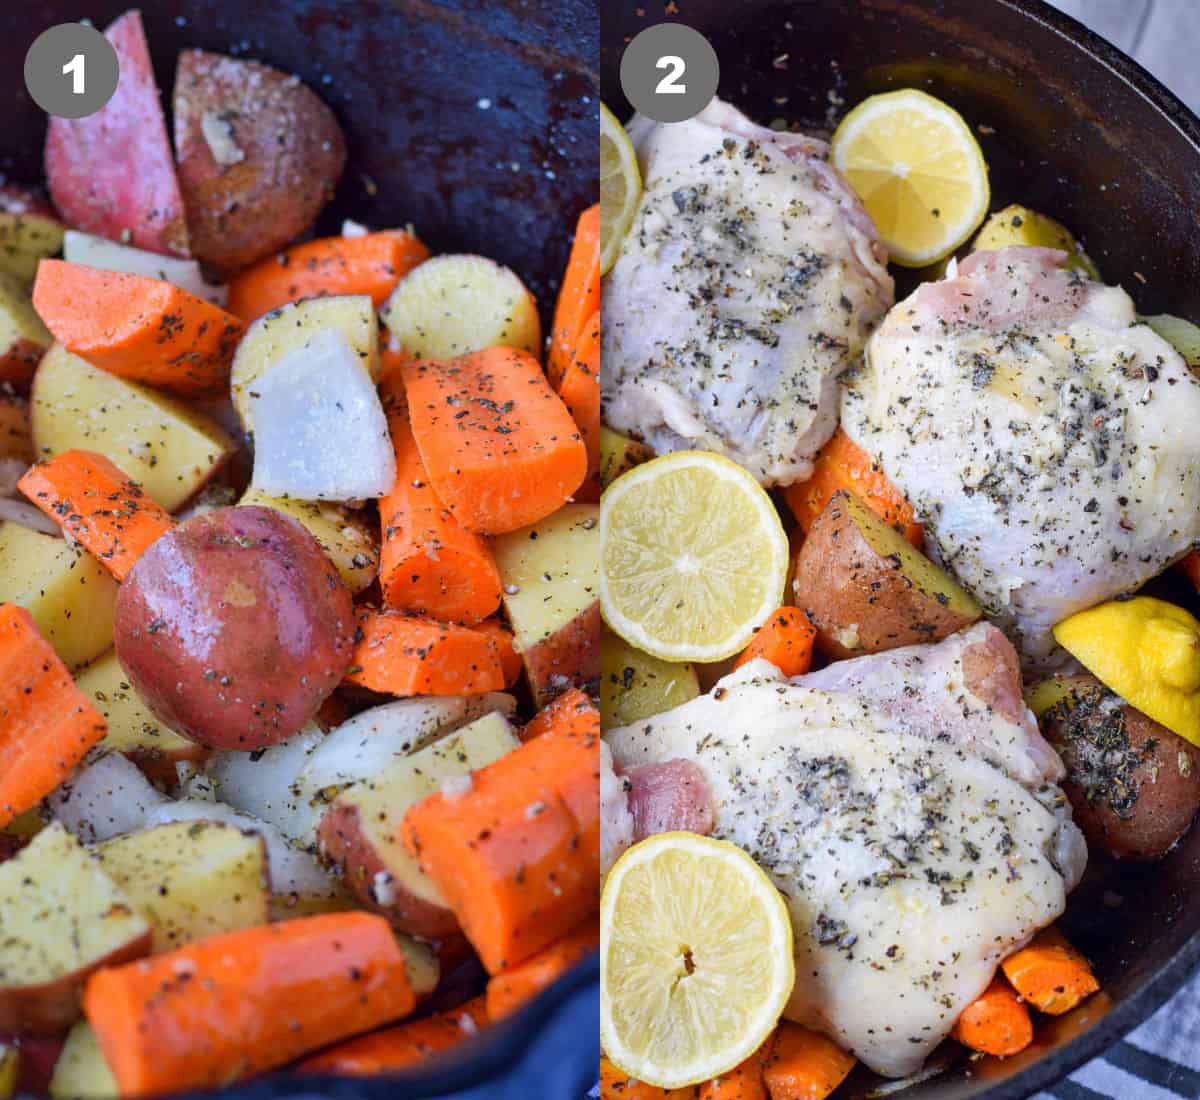 Potatoes and carrots placed in a pot then chicken thighs added on top.